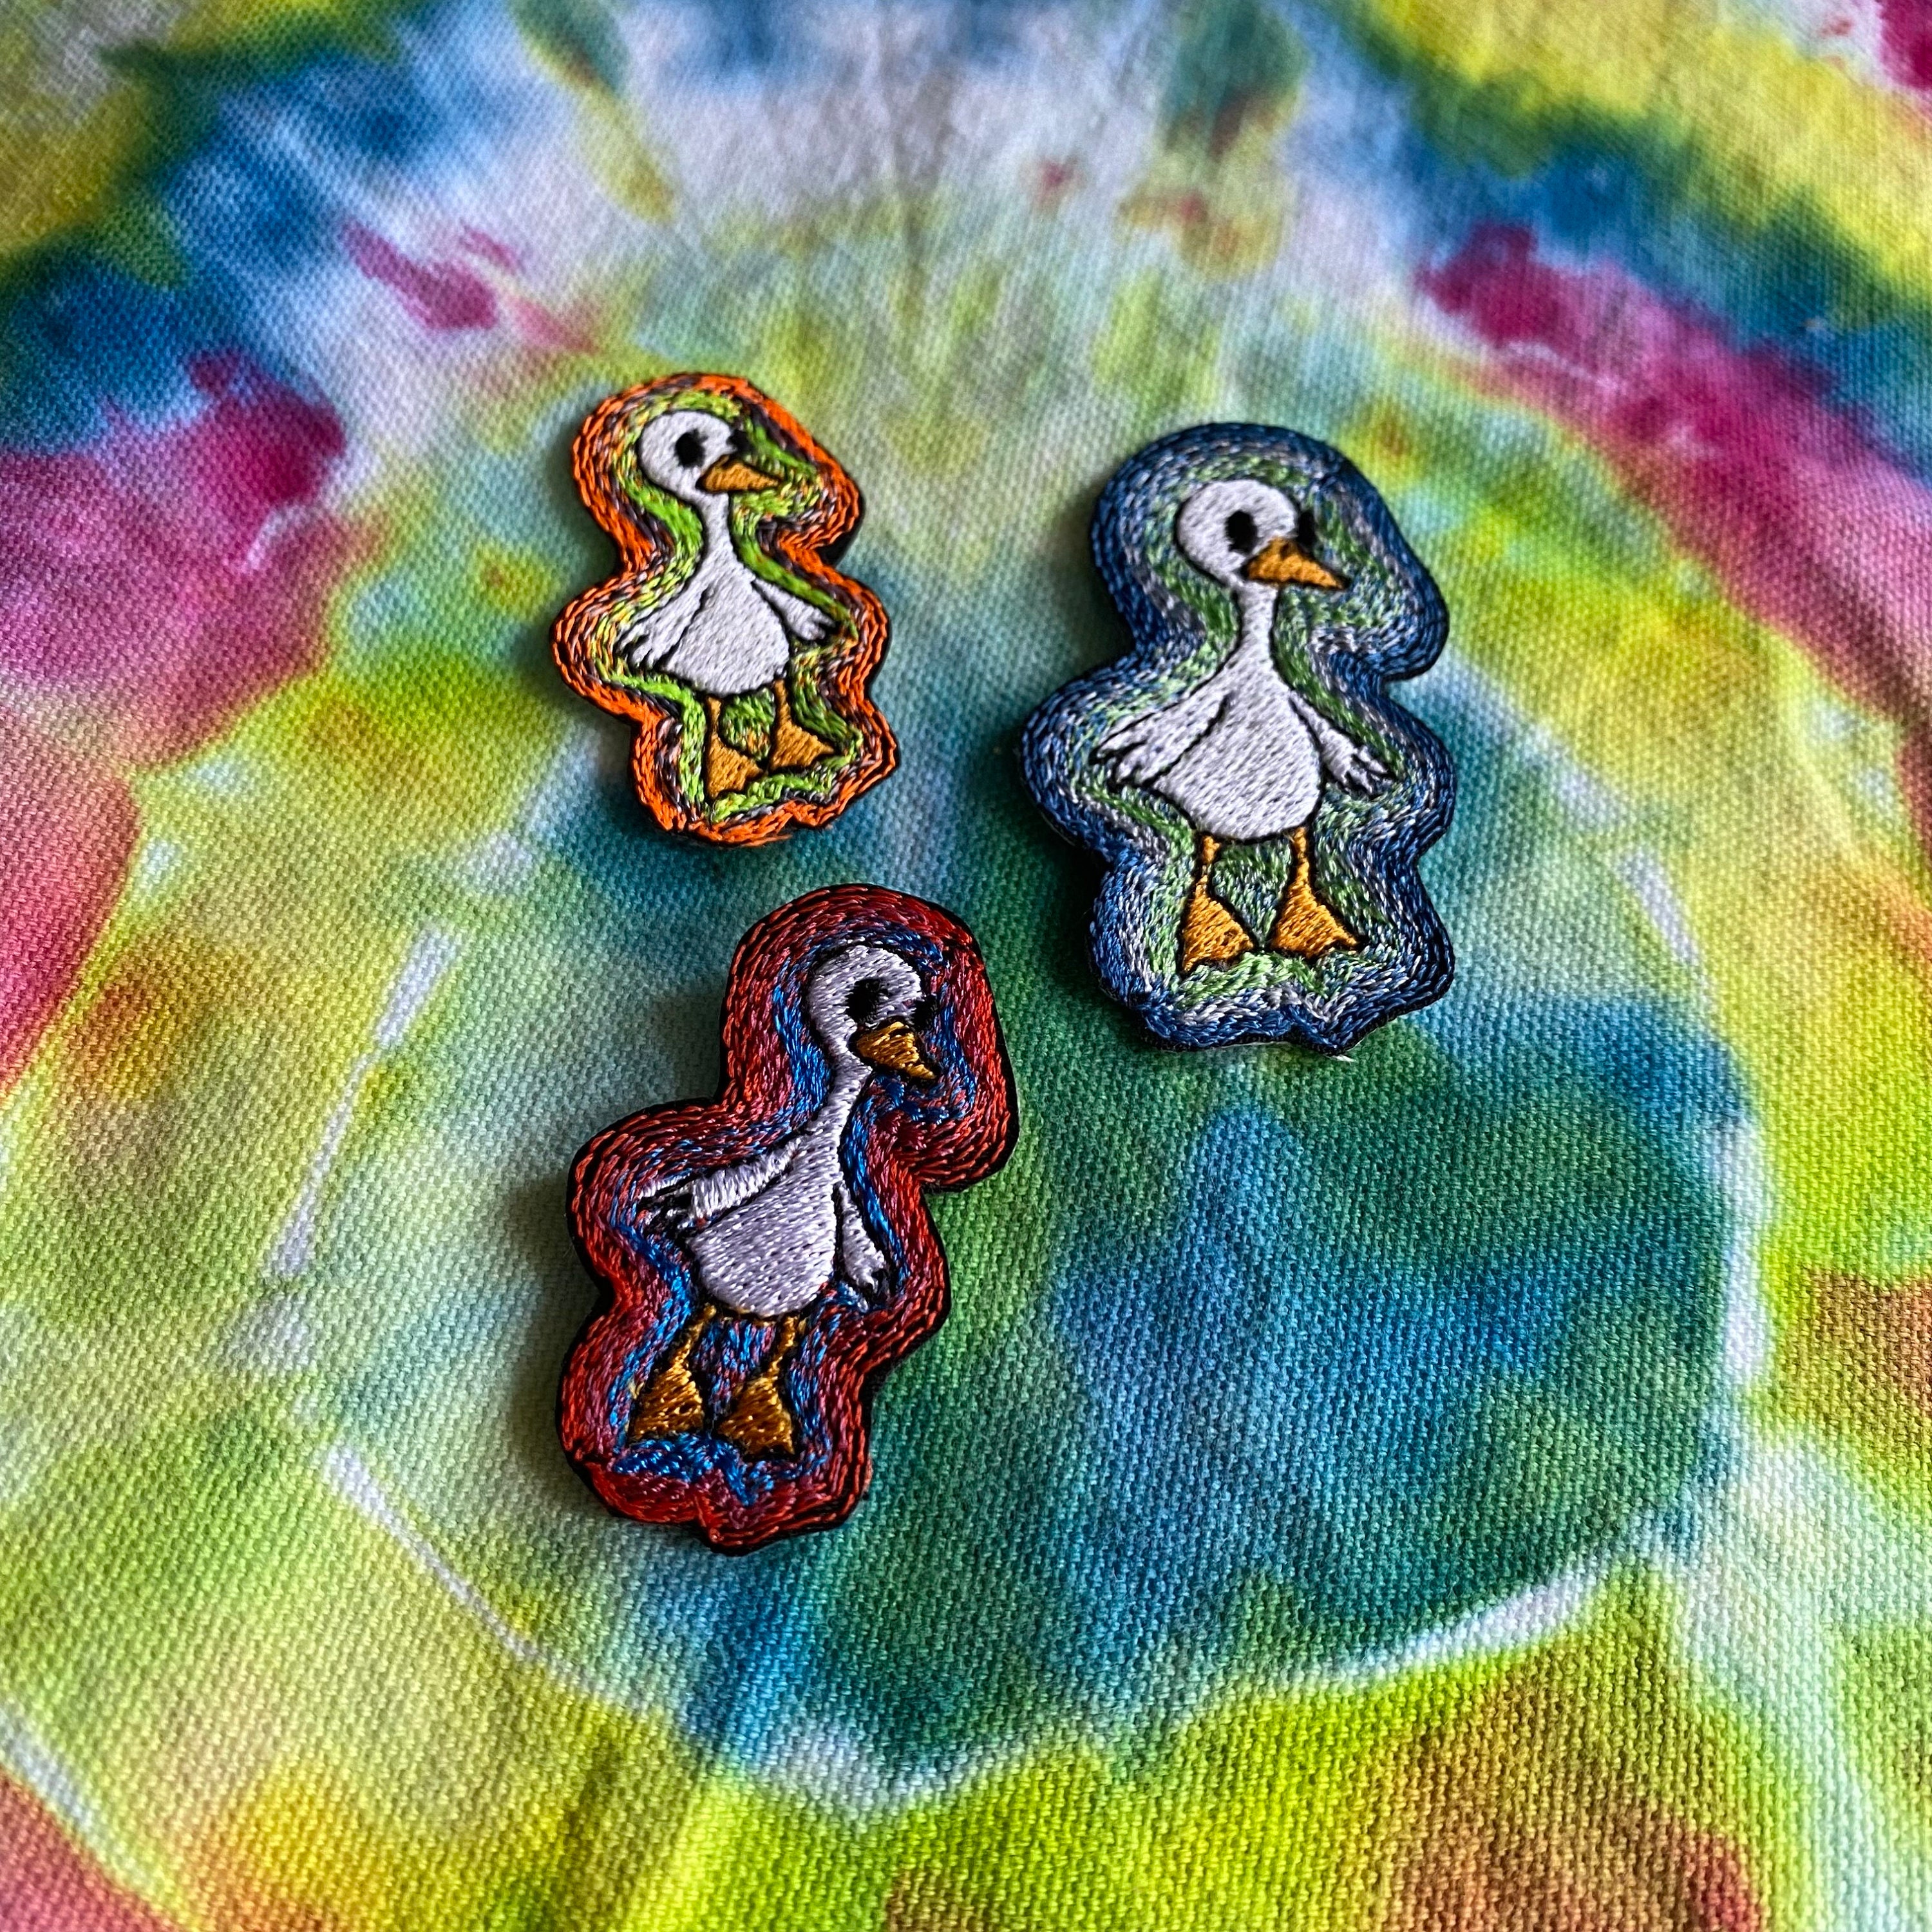 Rag Doll Patches